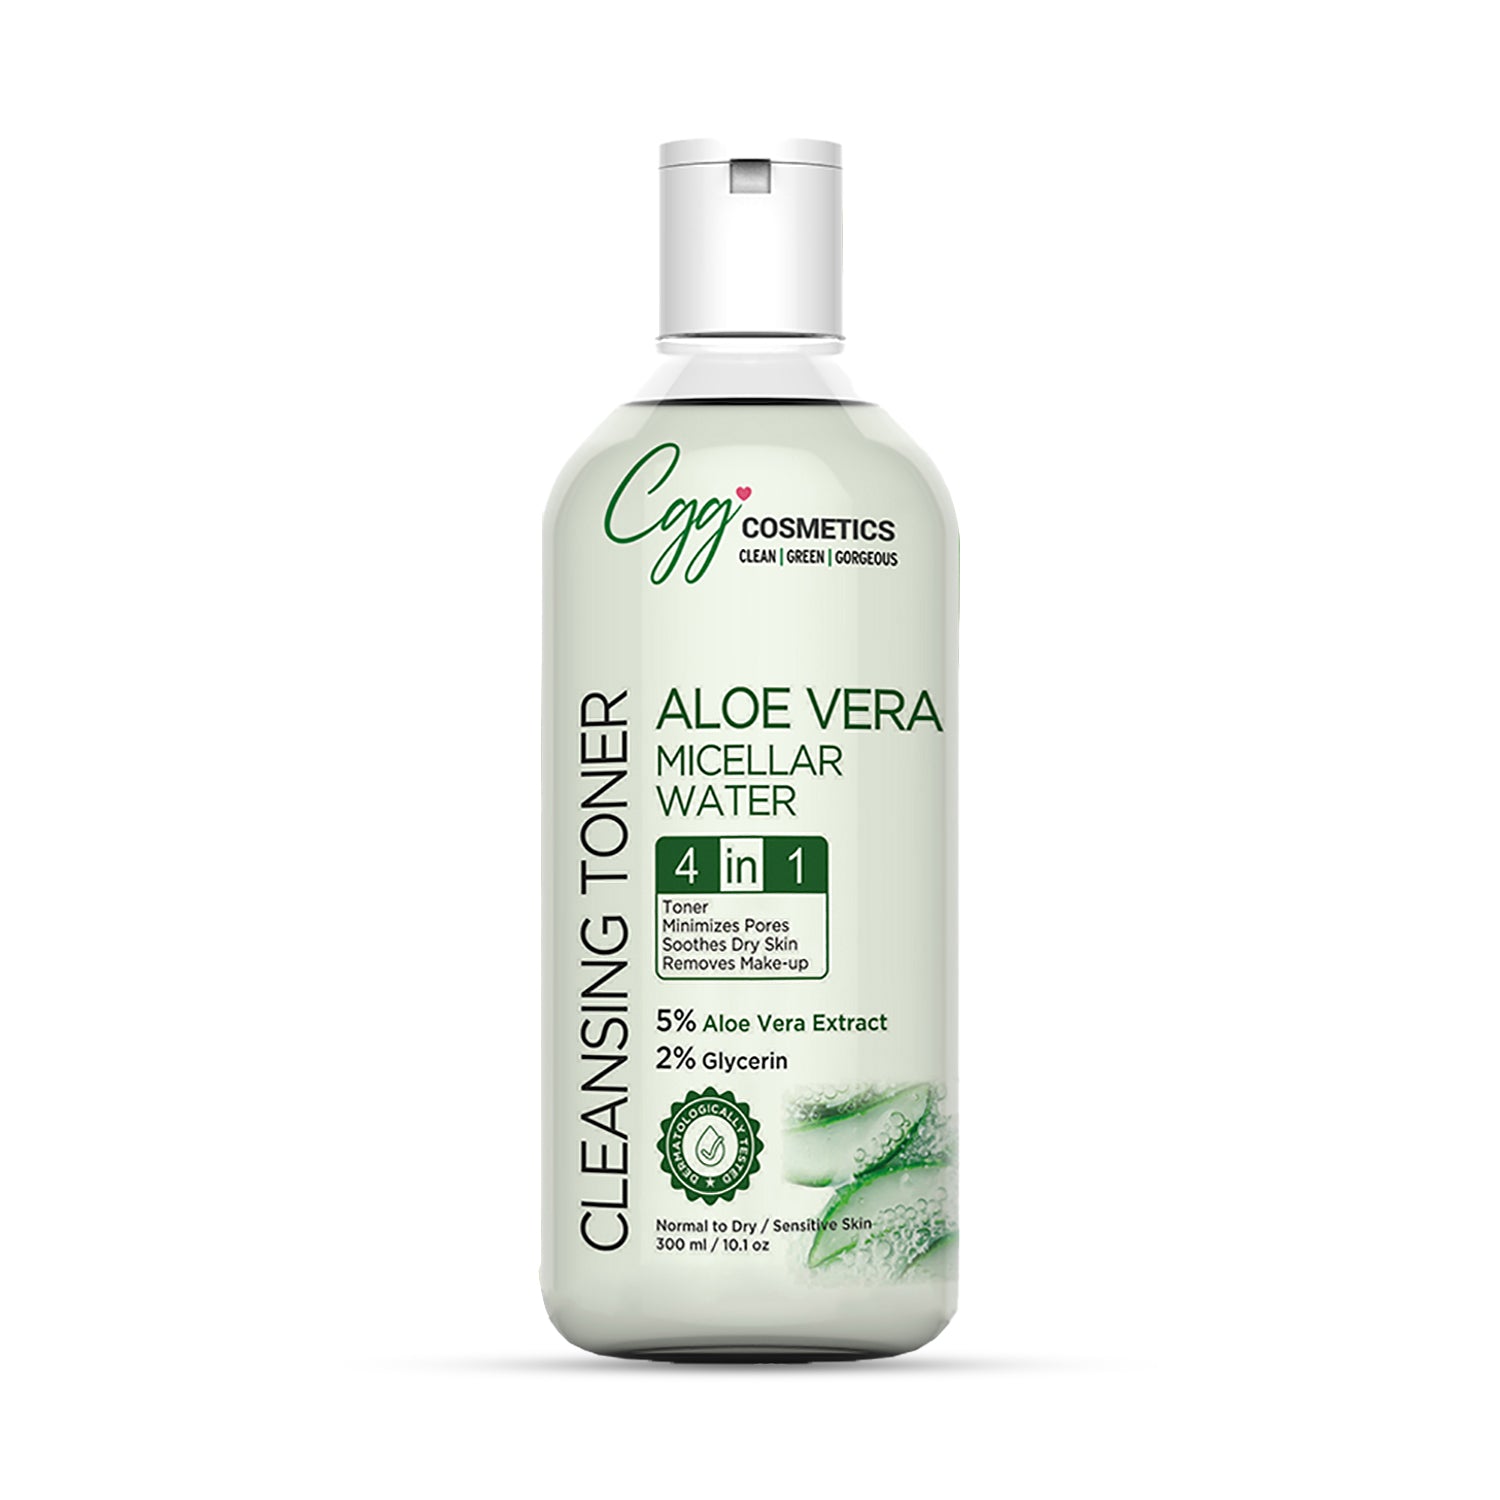 CGG Cosmetics Aloe Vera Micellar Water| 4 in 1 Toner, Removes Makeup, Minimizes Pores, Soothes Dry Skin - 300ml